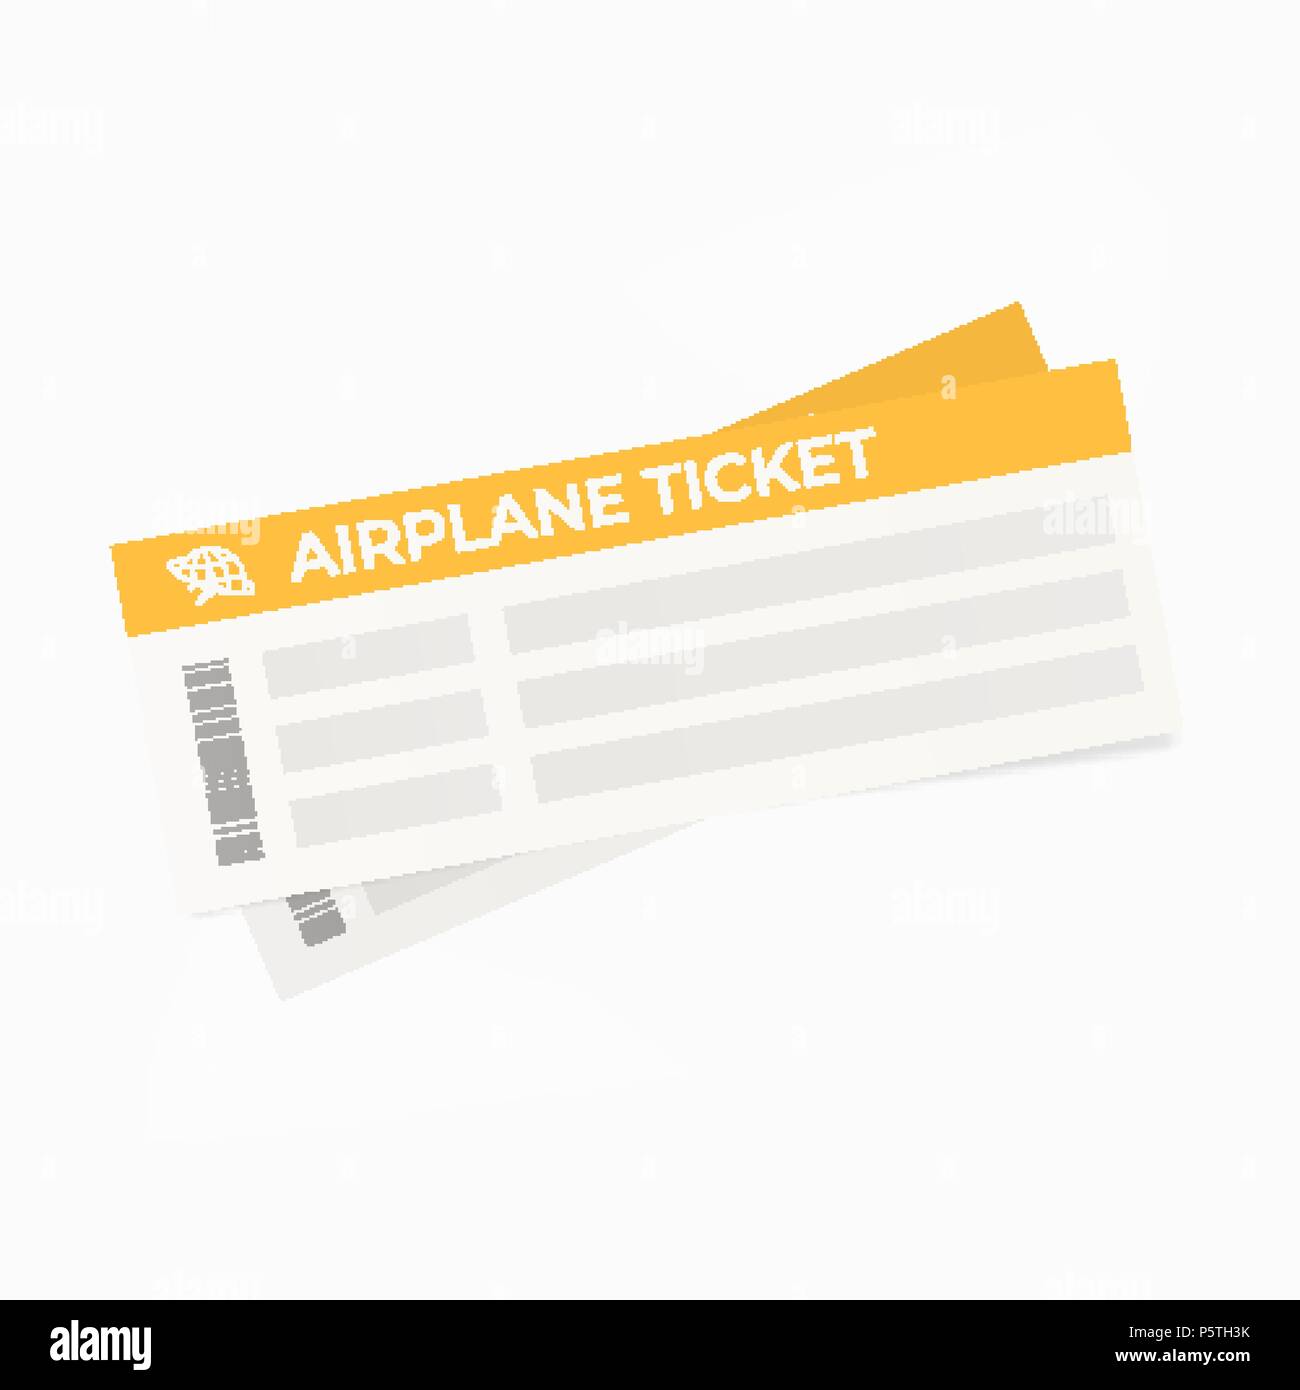 Simple airplane ticket illustration isolated on white background Stock Vector